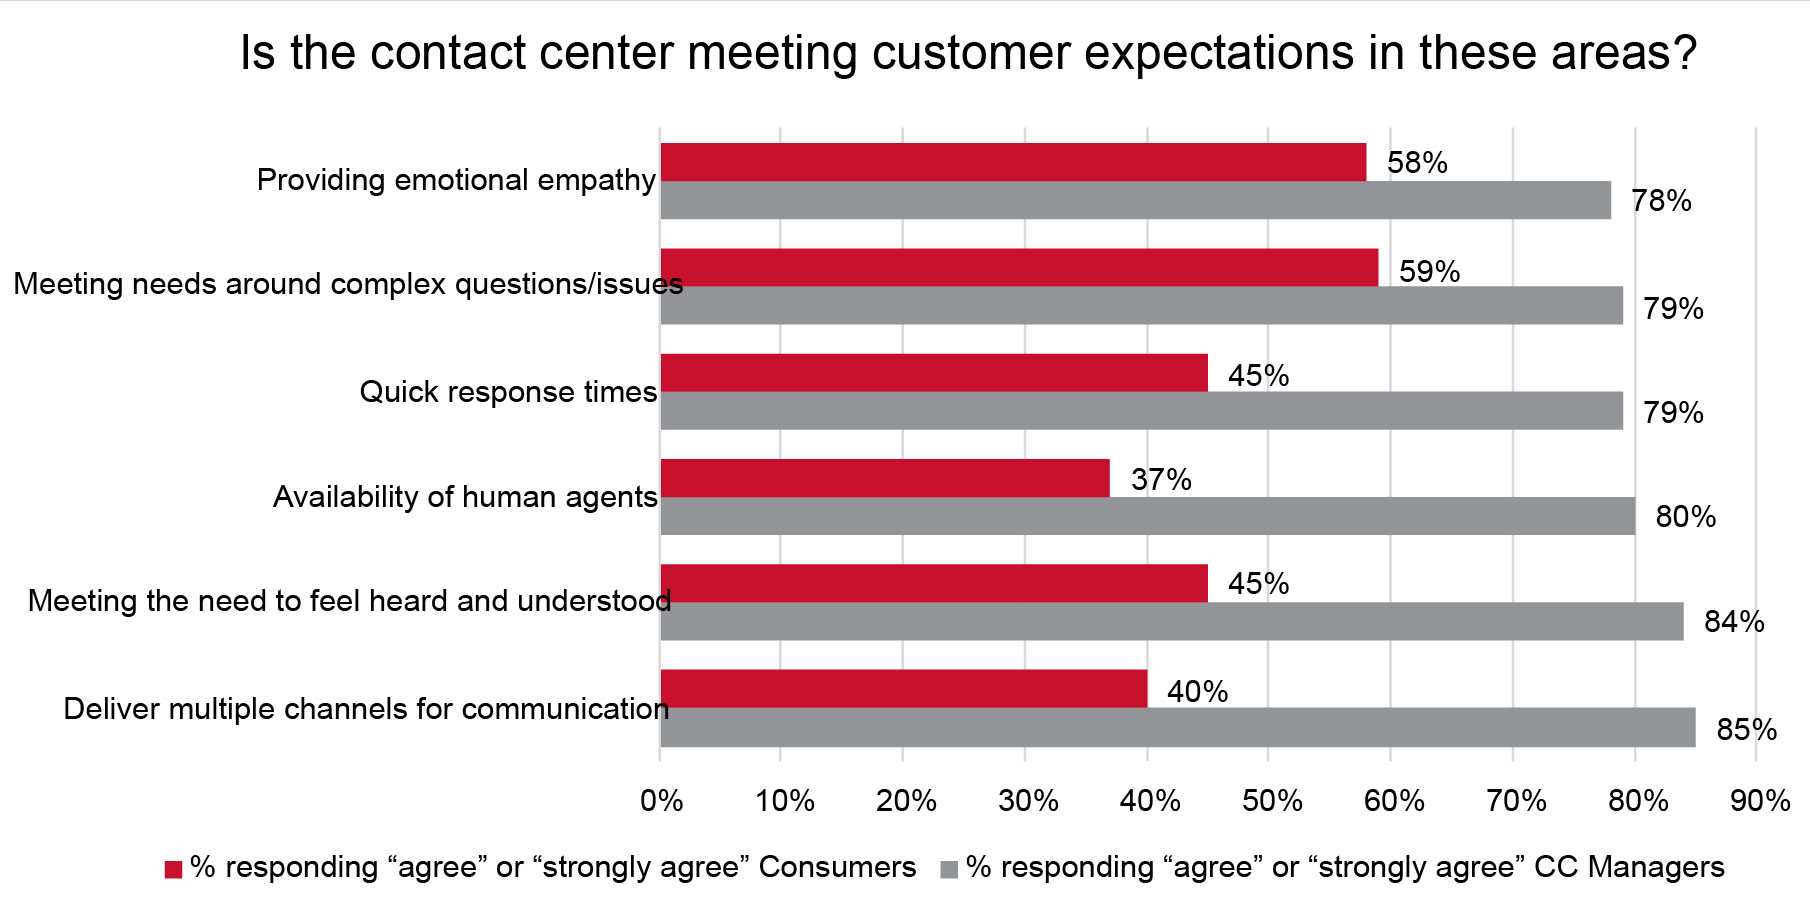 Is the contact center meeting customer expectations?